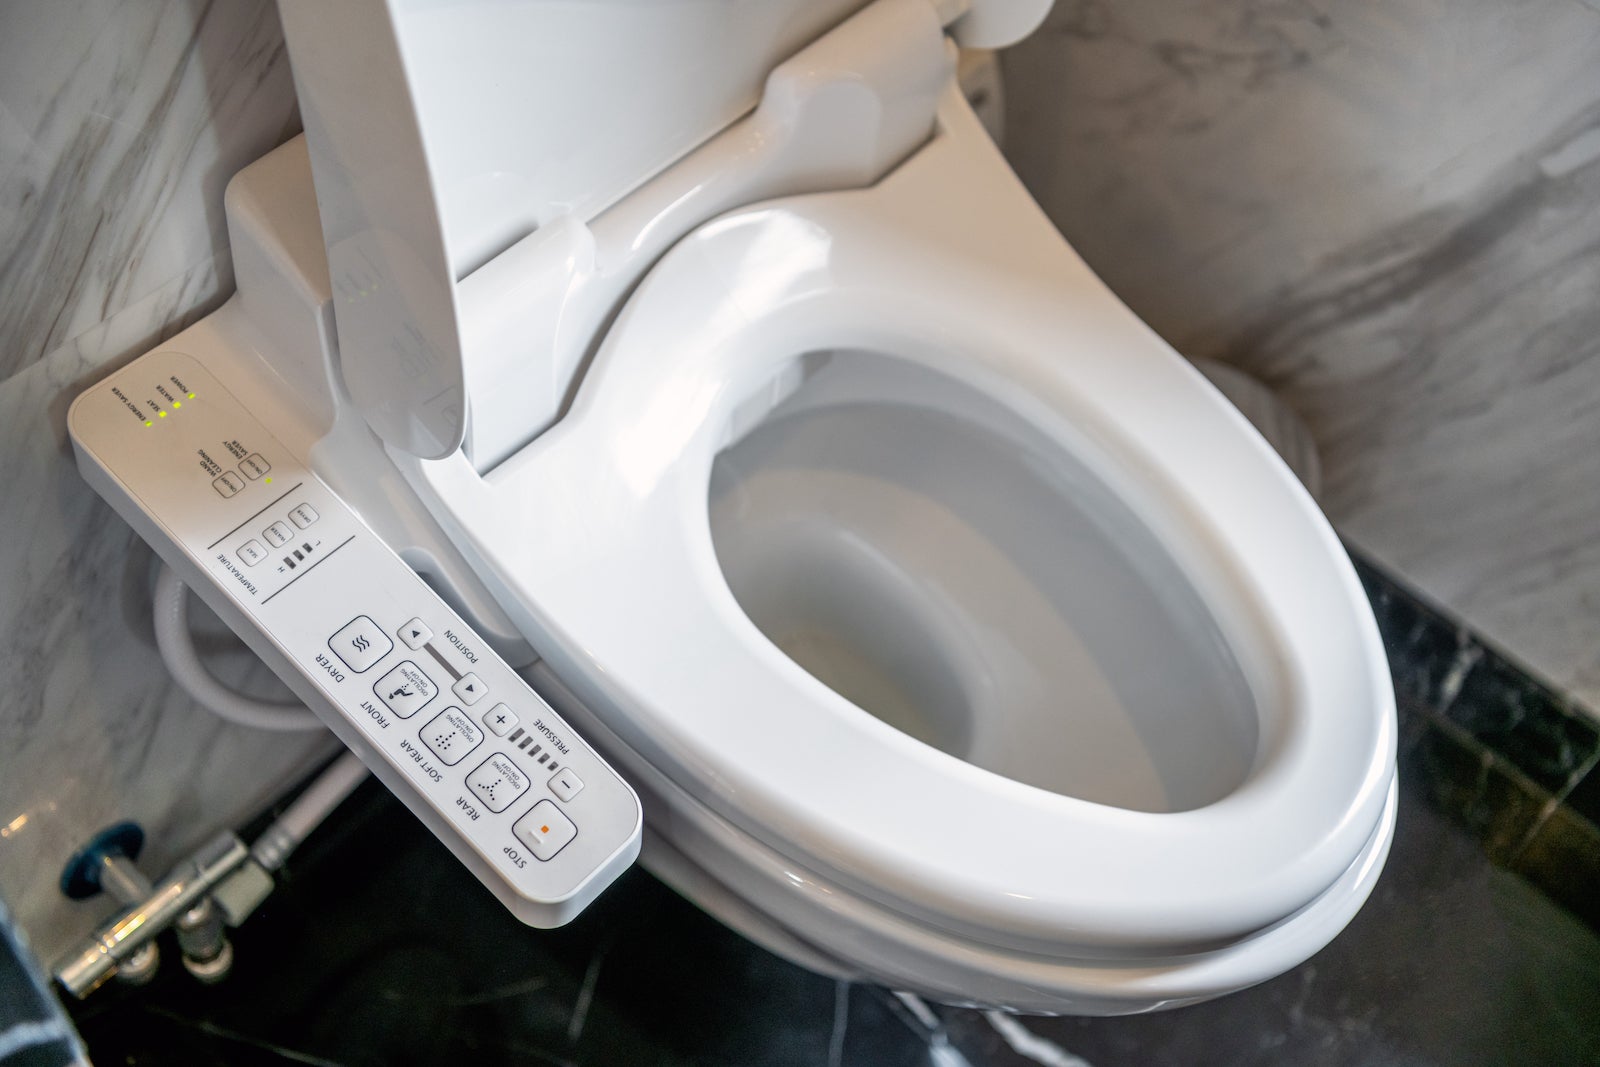 Here’s why my favorite hotel amenity is a heated toilet seat